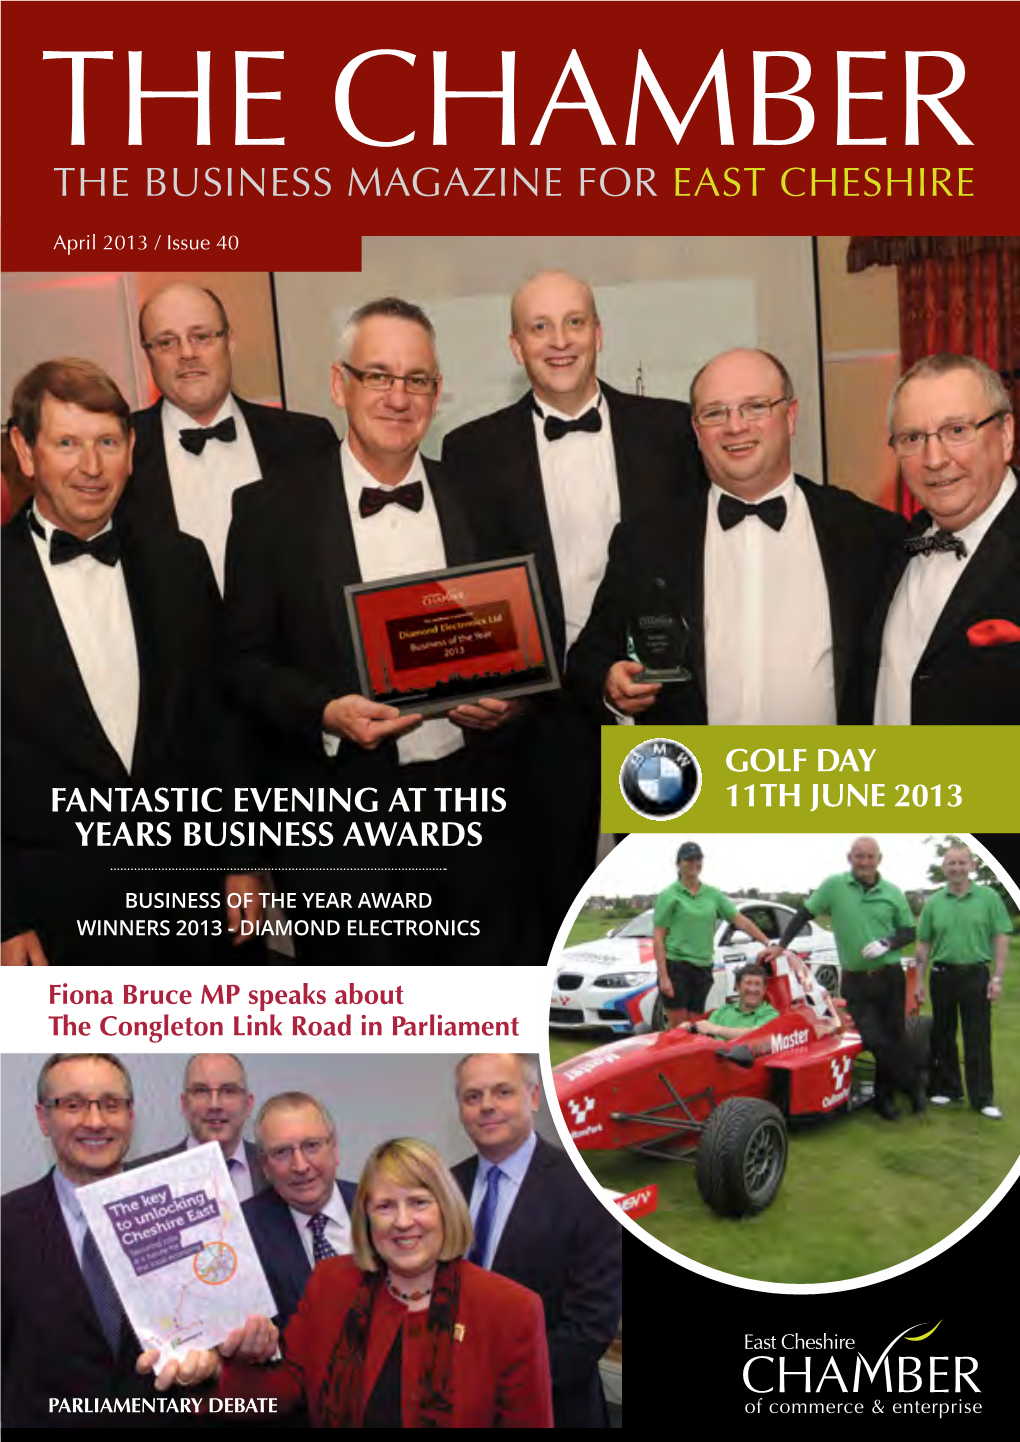 The Business Magazine for East Cheshire